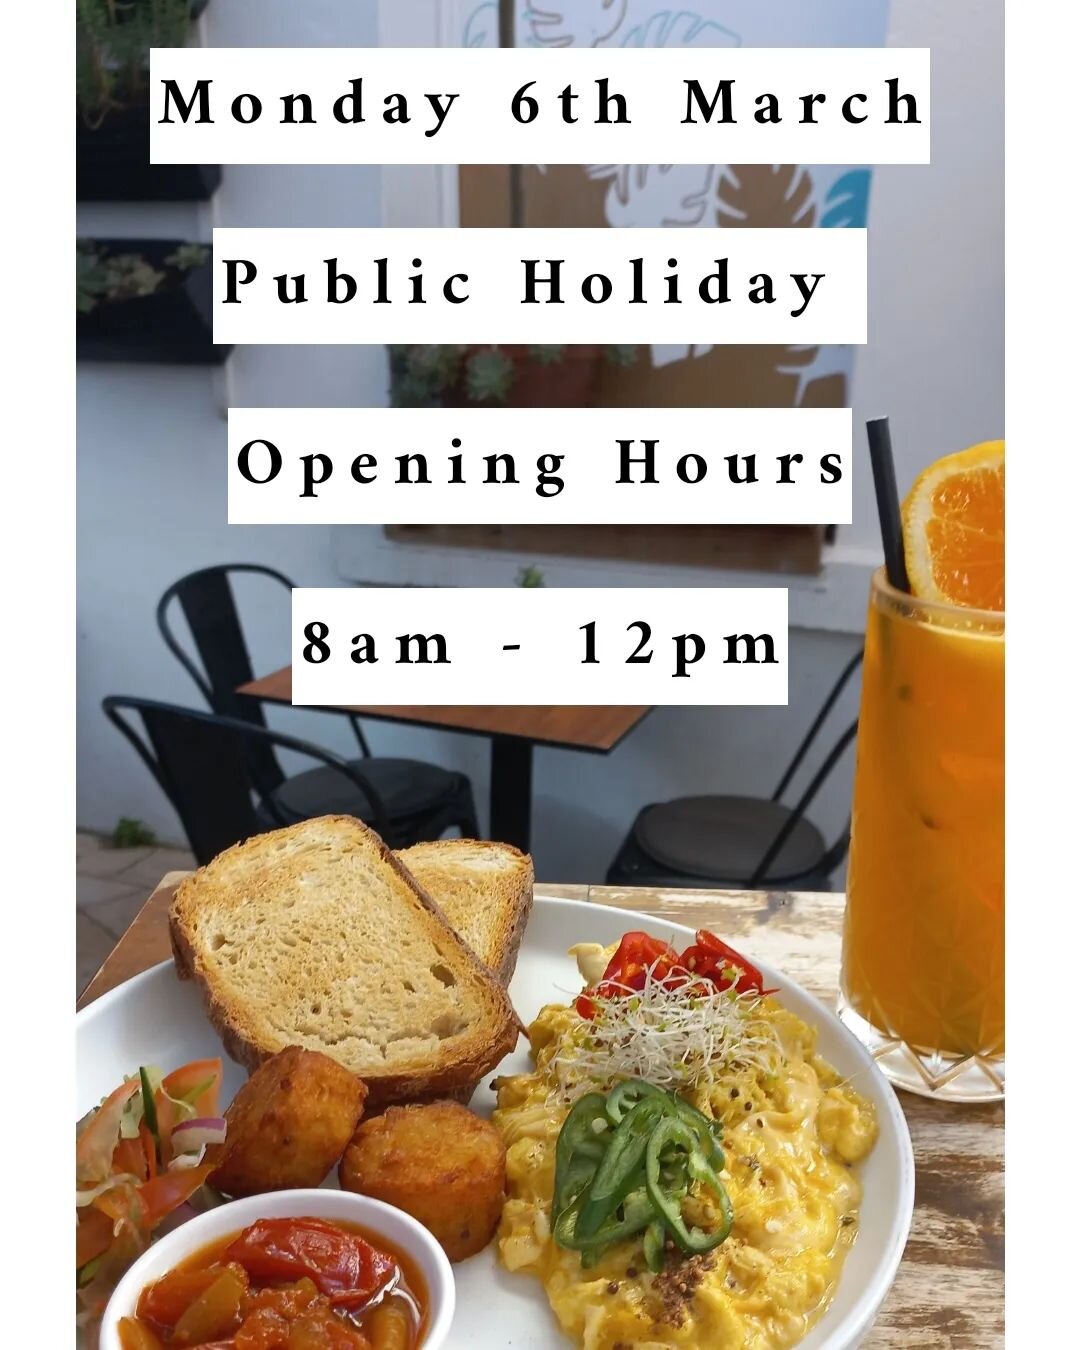 Reminder that Monday the 6th of March is a Public Holiday and our Public Holiday Opening hours will apply. 
Open 8am - 12pm
.
.
#opensevendays #publicholiday #duckduckbruce #facefillingawesomeness #fremantle #cafe #freocafe #brunch #juice